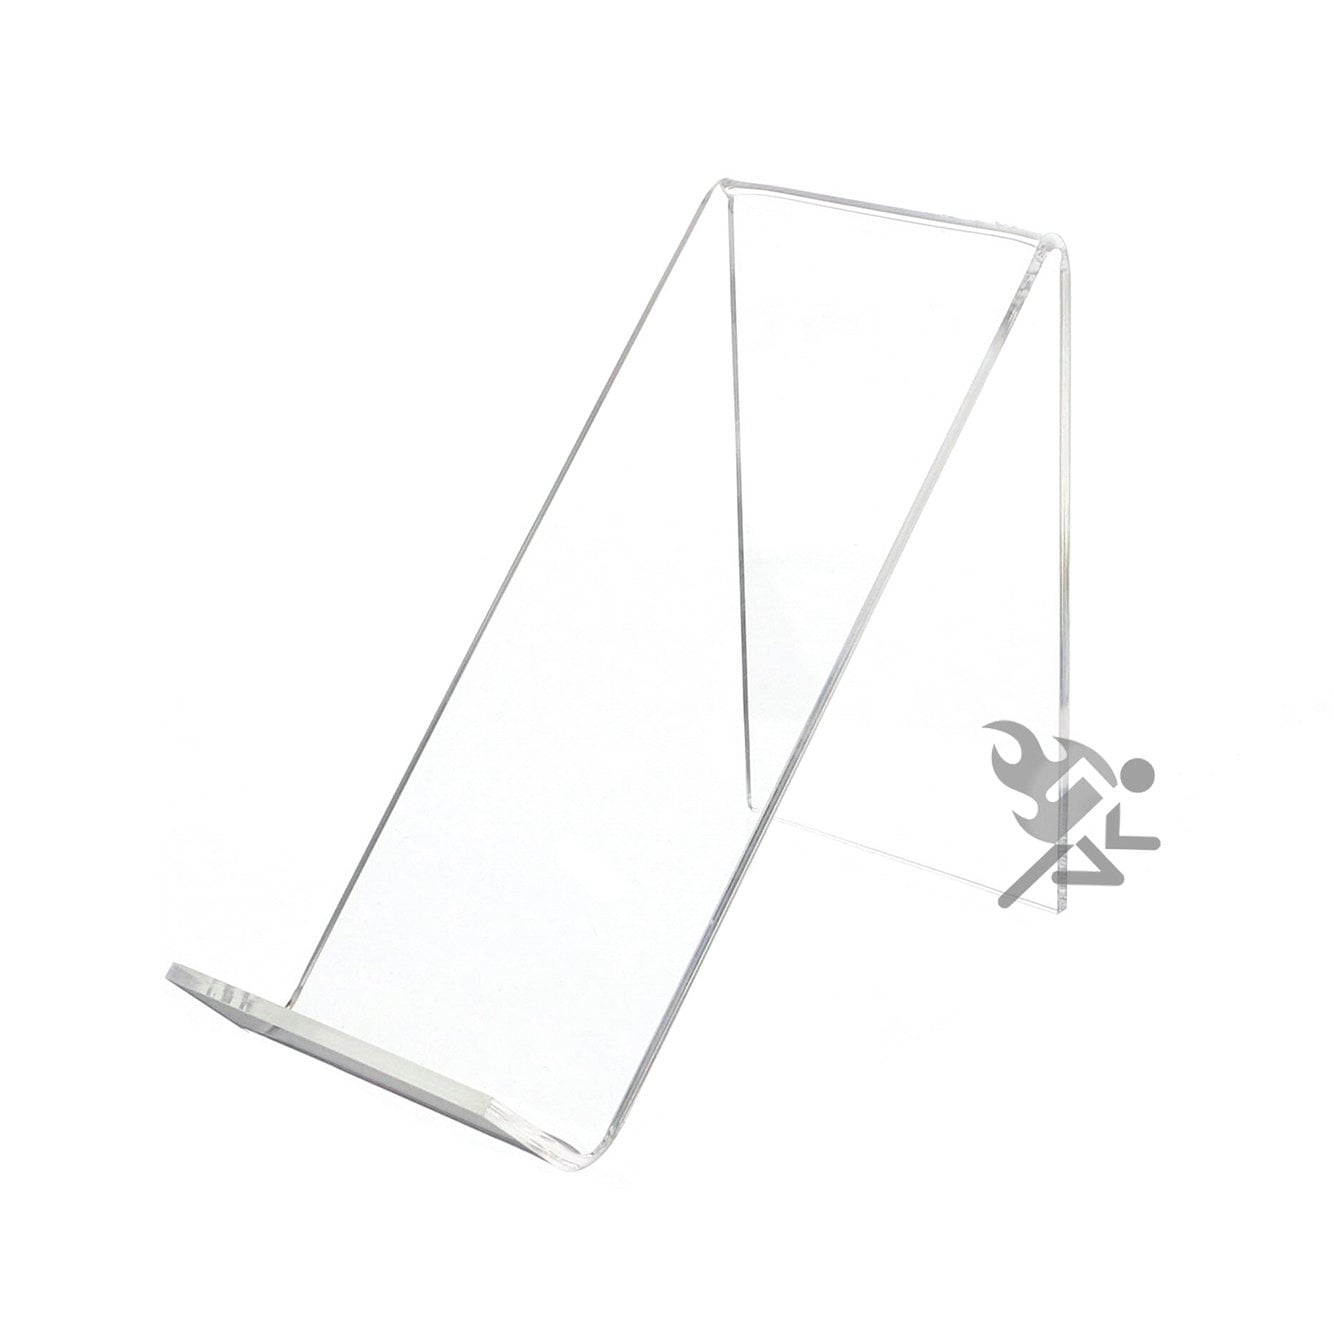 Pen & Spoon Display Stand Easel Qty 5 